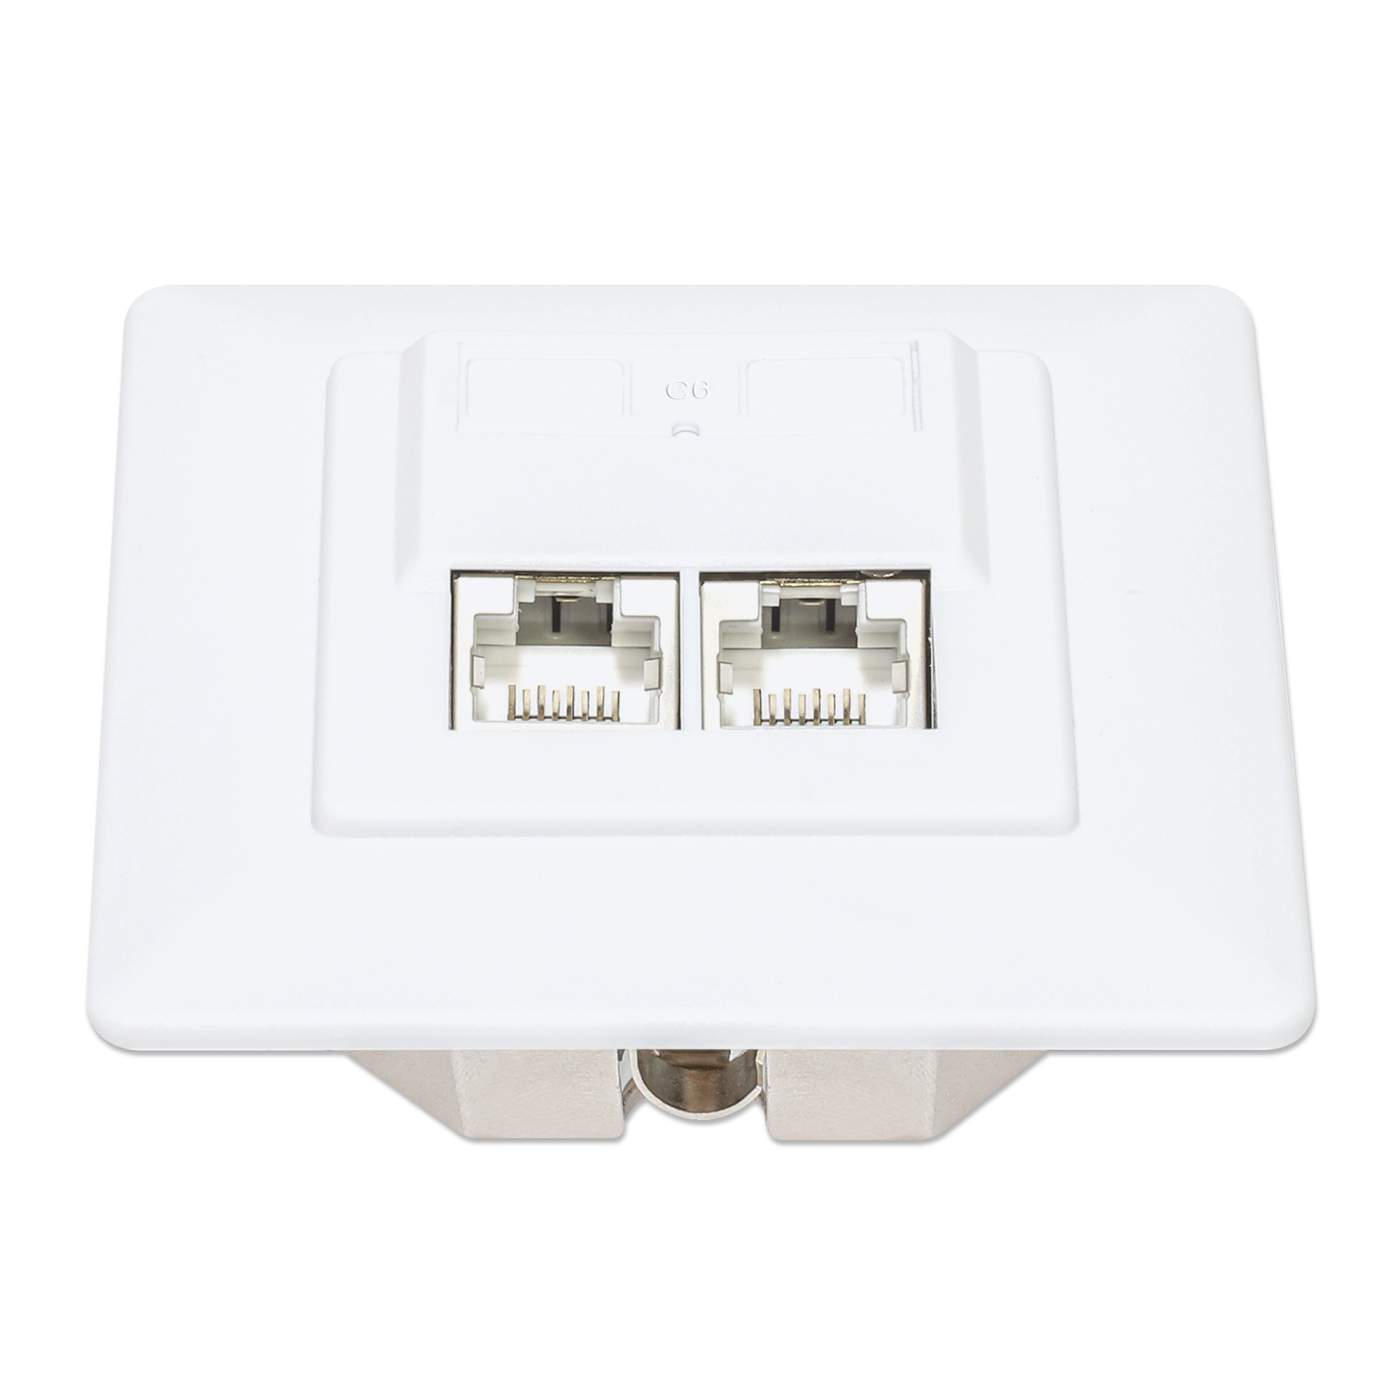 2-Port Cat6 10G Shielded RJ45 Wall Plate Image 4